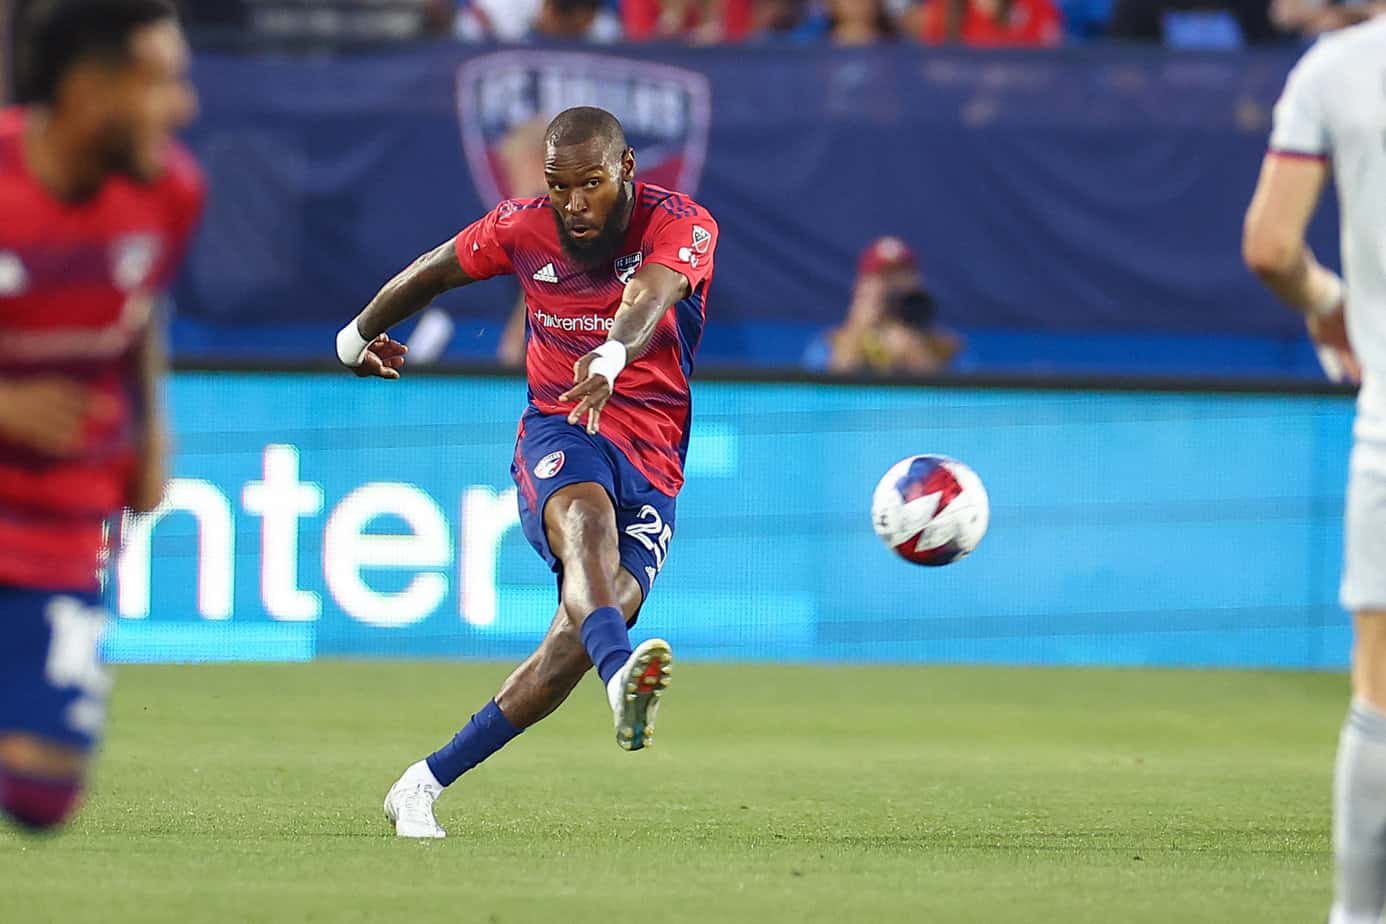 St. Louis City vs. FC Dallas Betting Odds and Preview